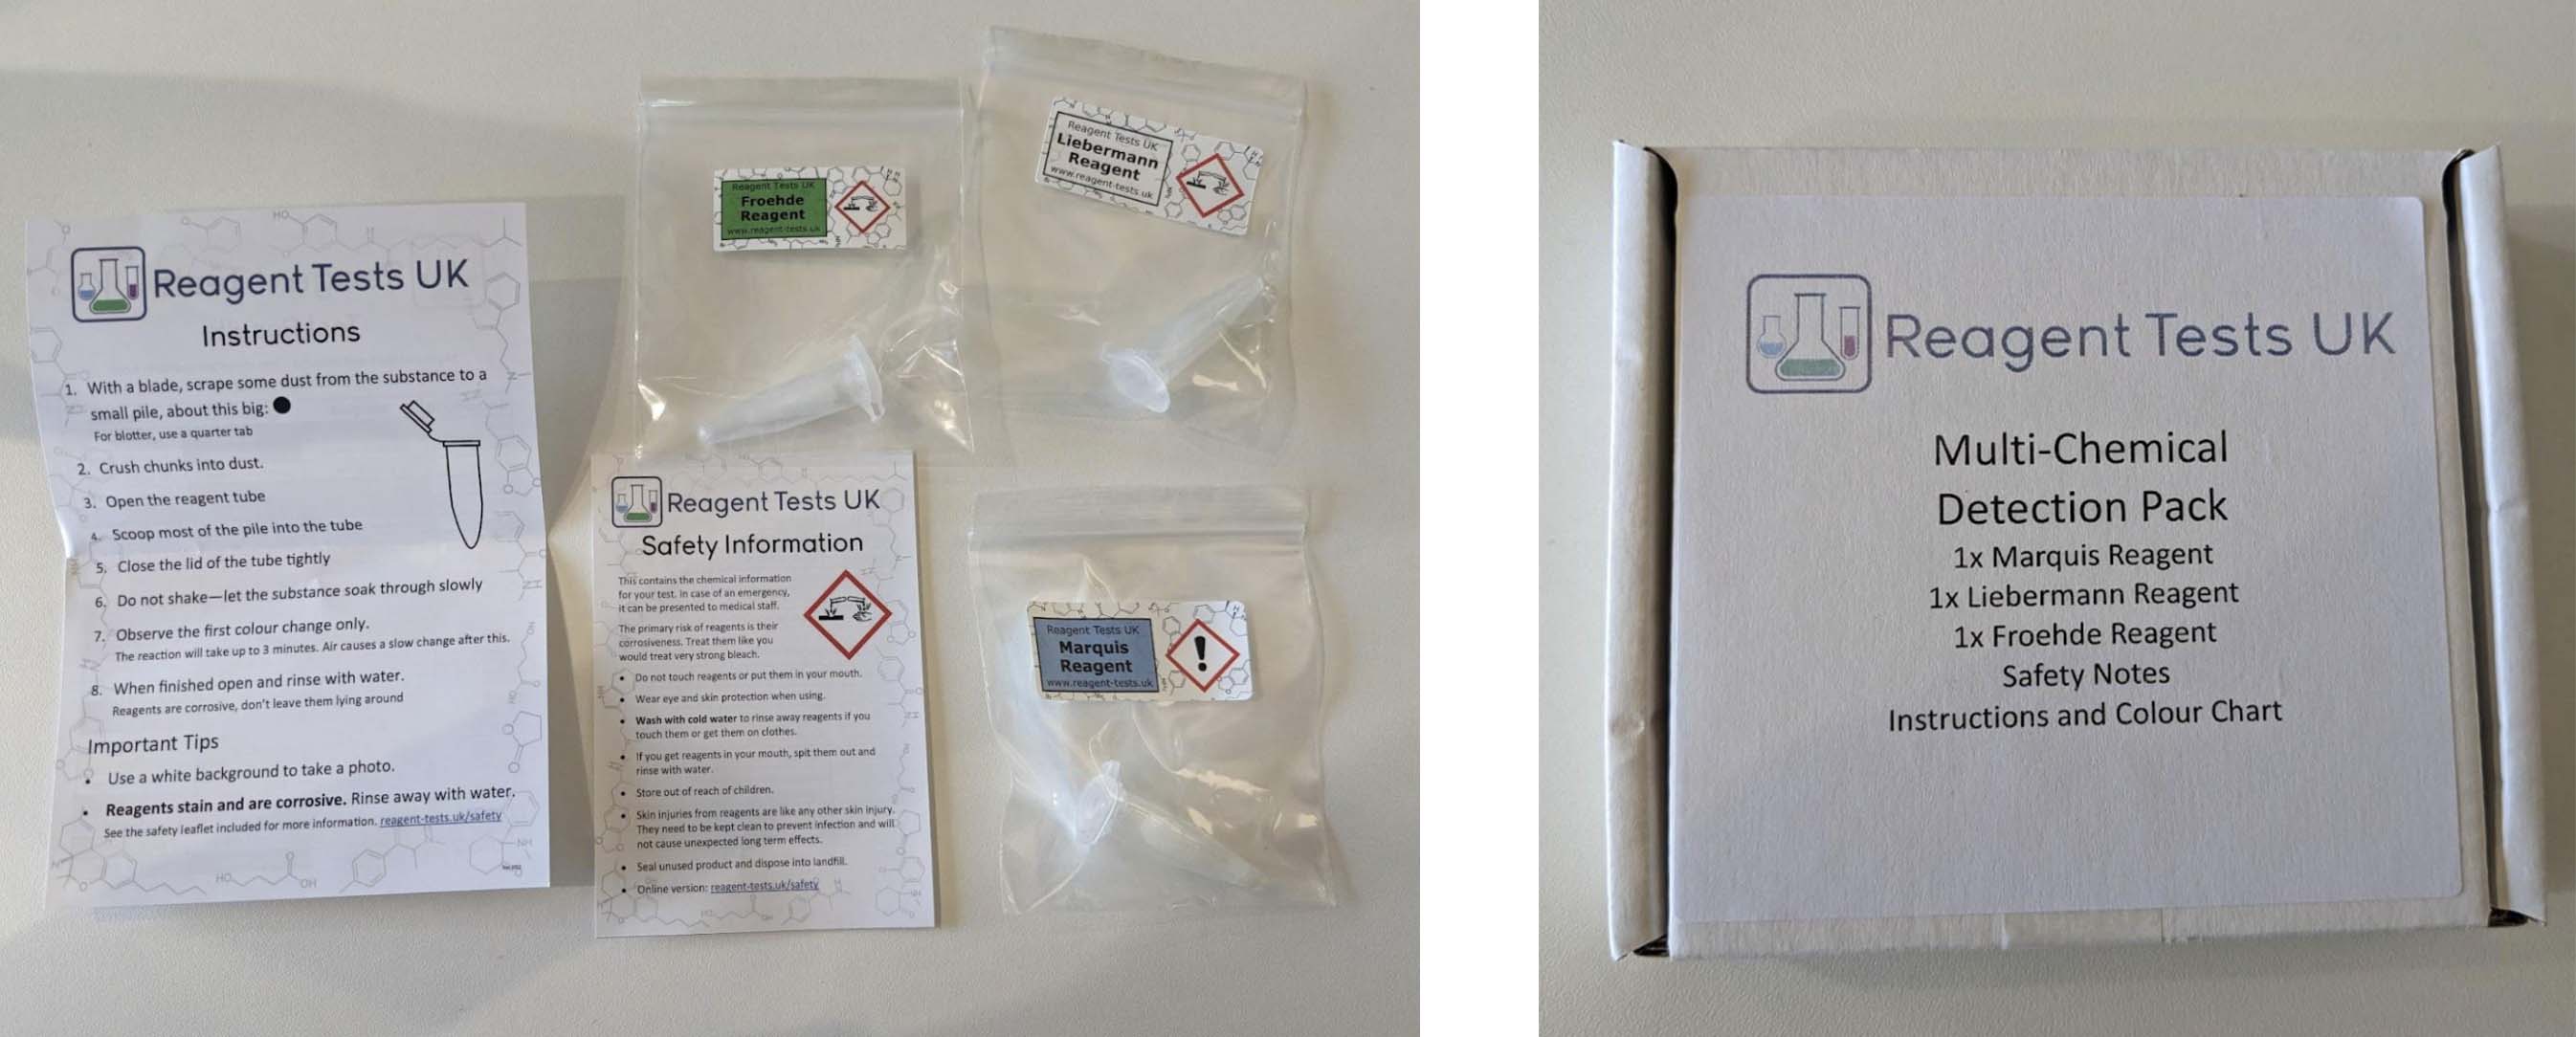 Image of the drug testing kit. It is a small white box, and inside there are three plastic bags labelled Froehde Reagent, Liebermann Reagent and Marquis reagent. There are also two leaflets.